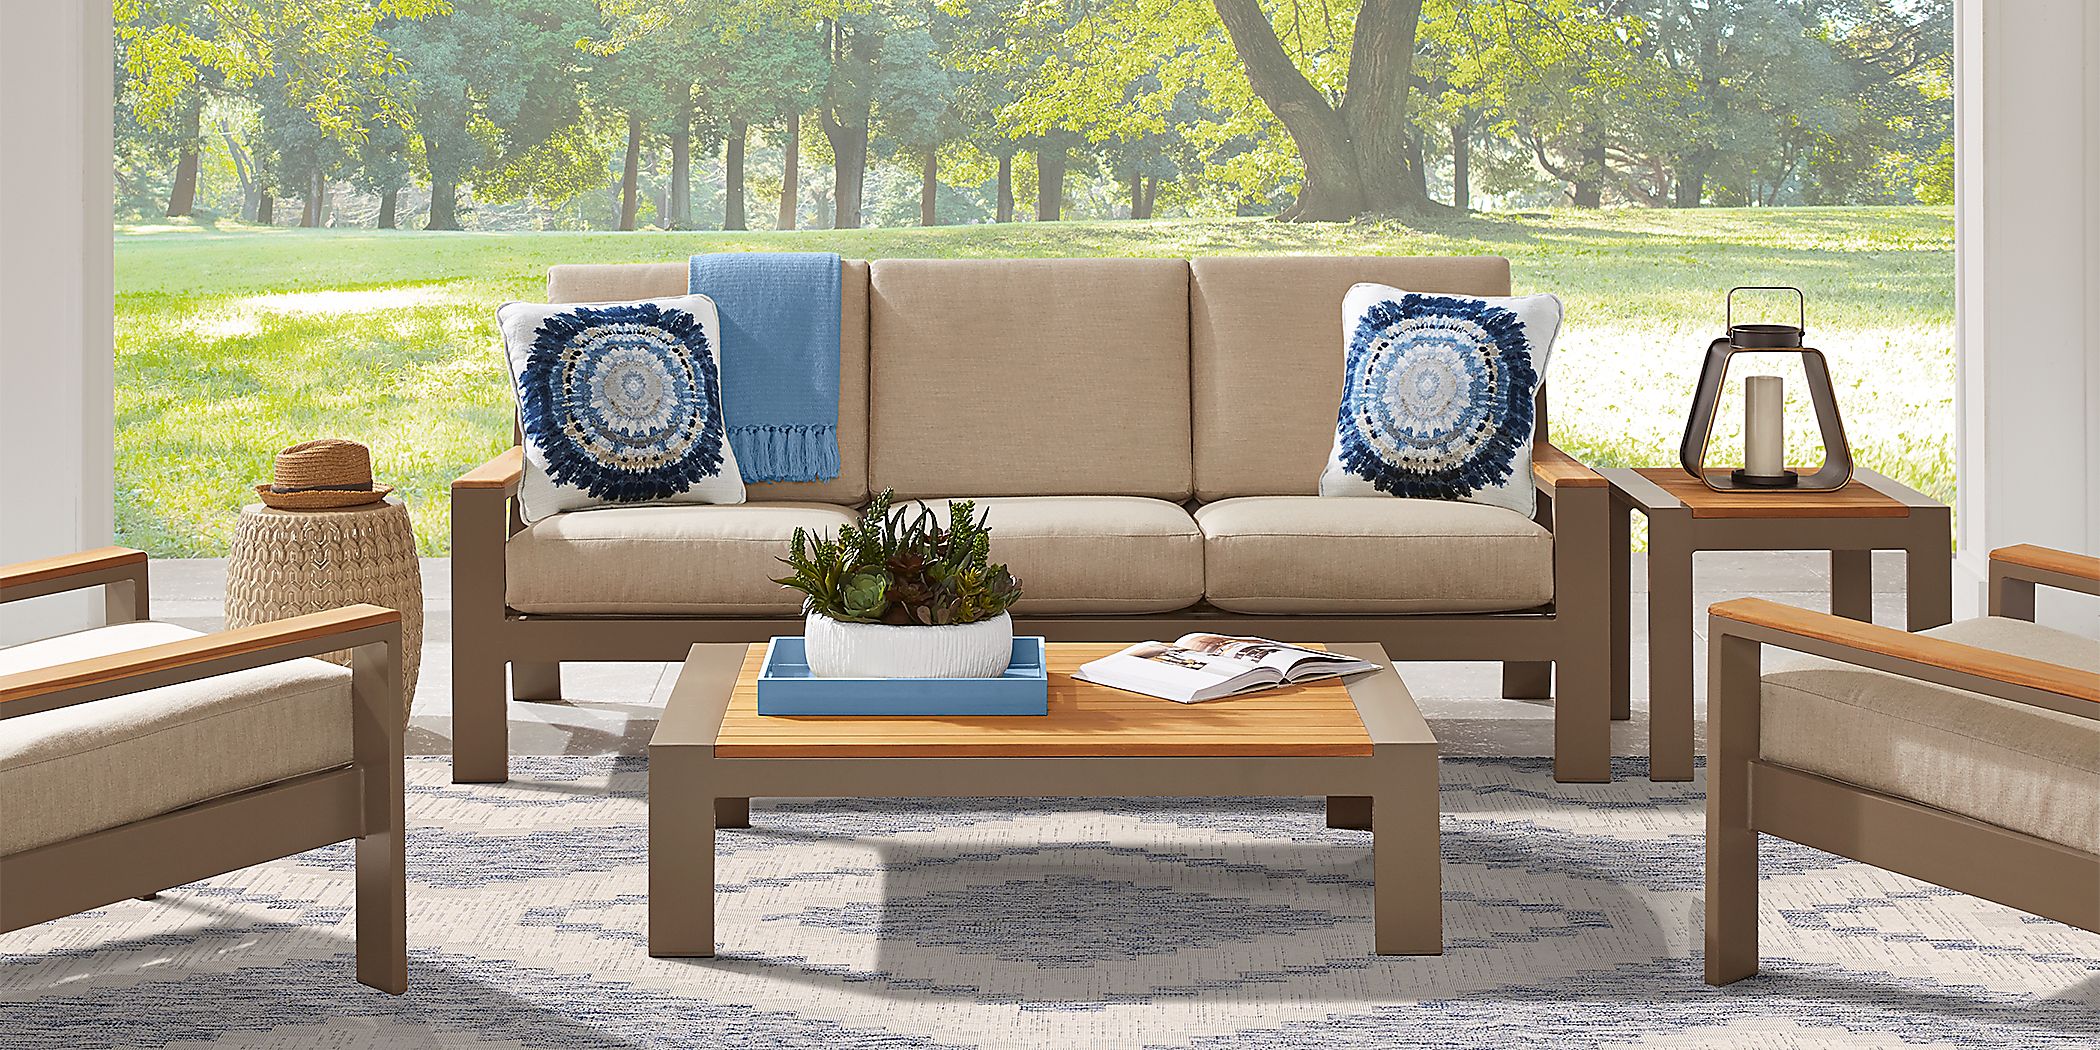 Solana Taupe 4 Pc Outdoor Seating Set with Beige Cushions